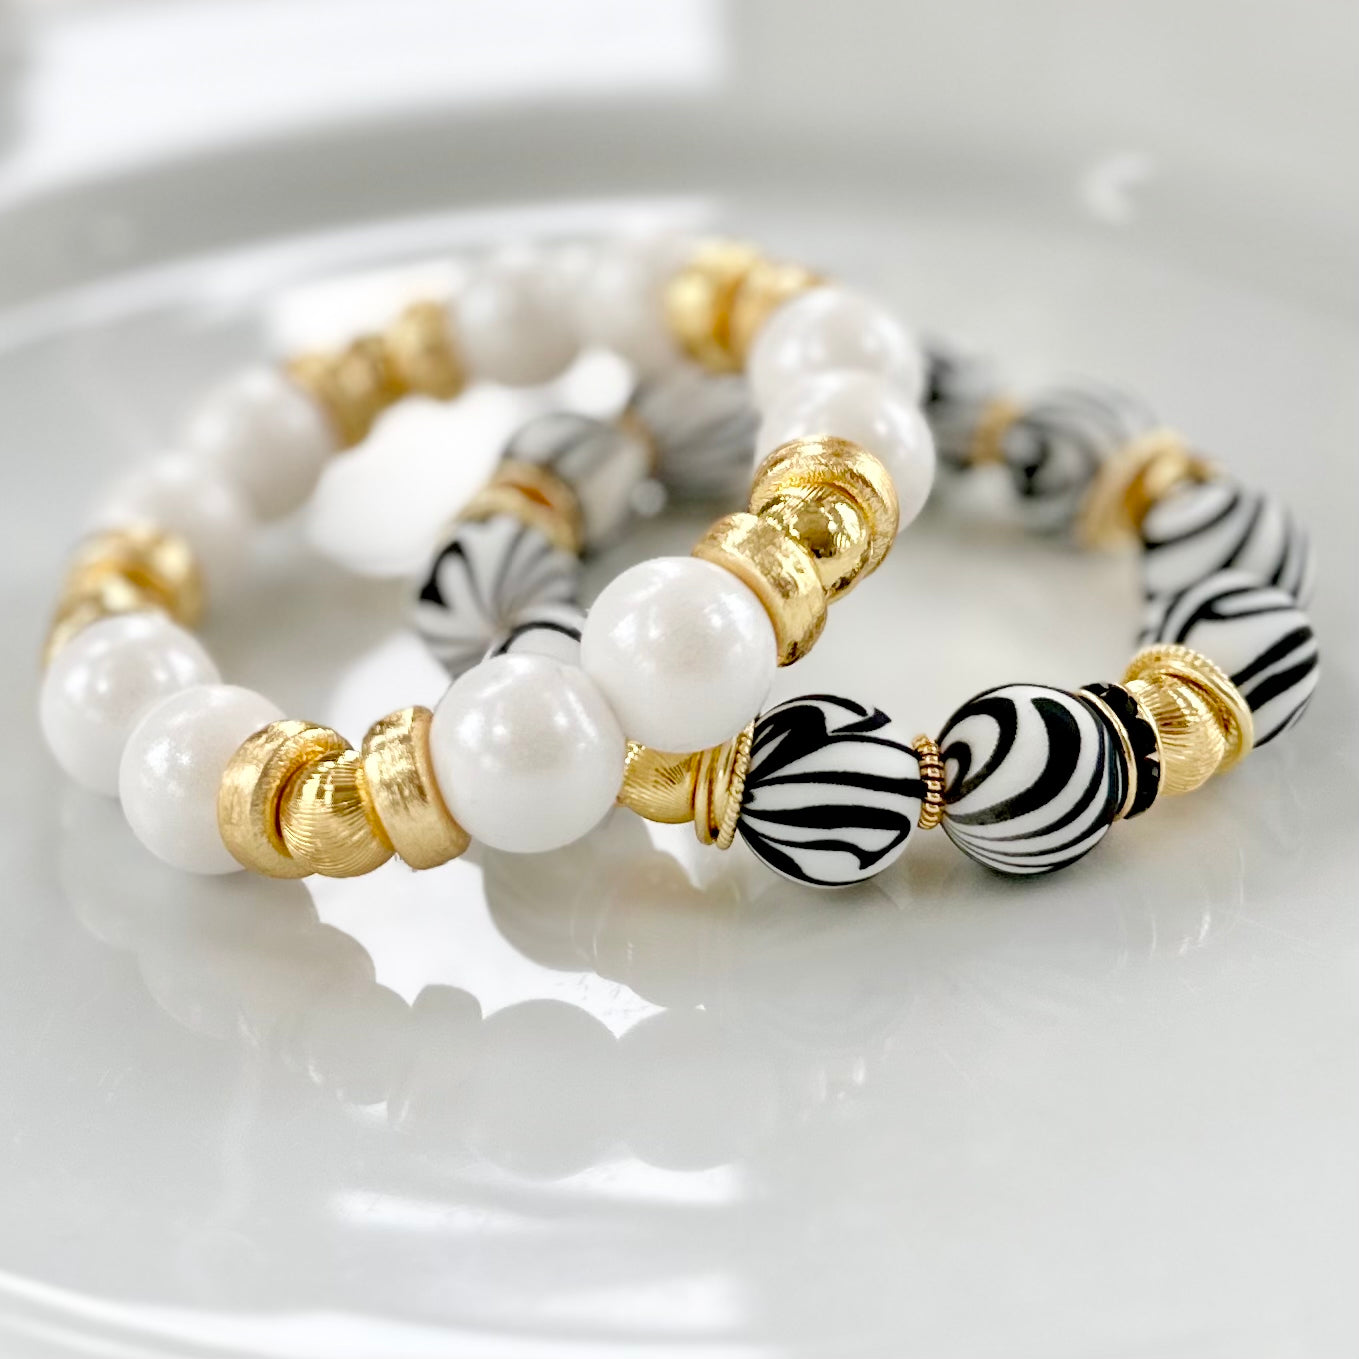 BLACK AND WHITE ZEBRA BANGLE WITH GOLD ACCENTS